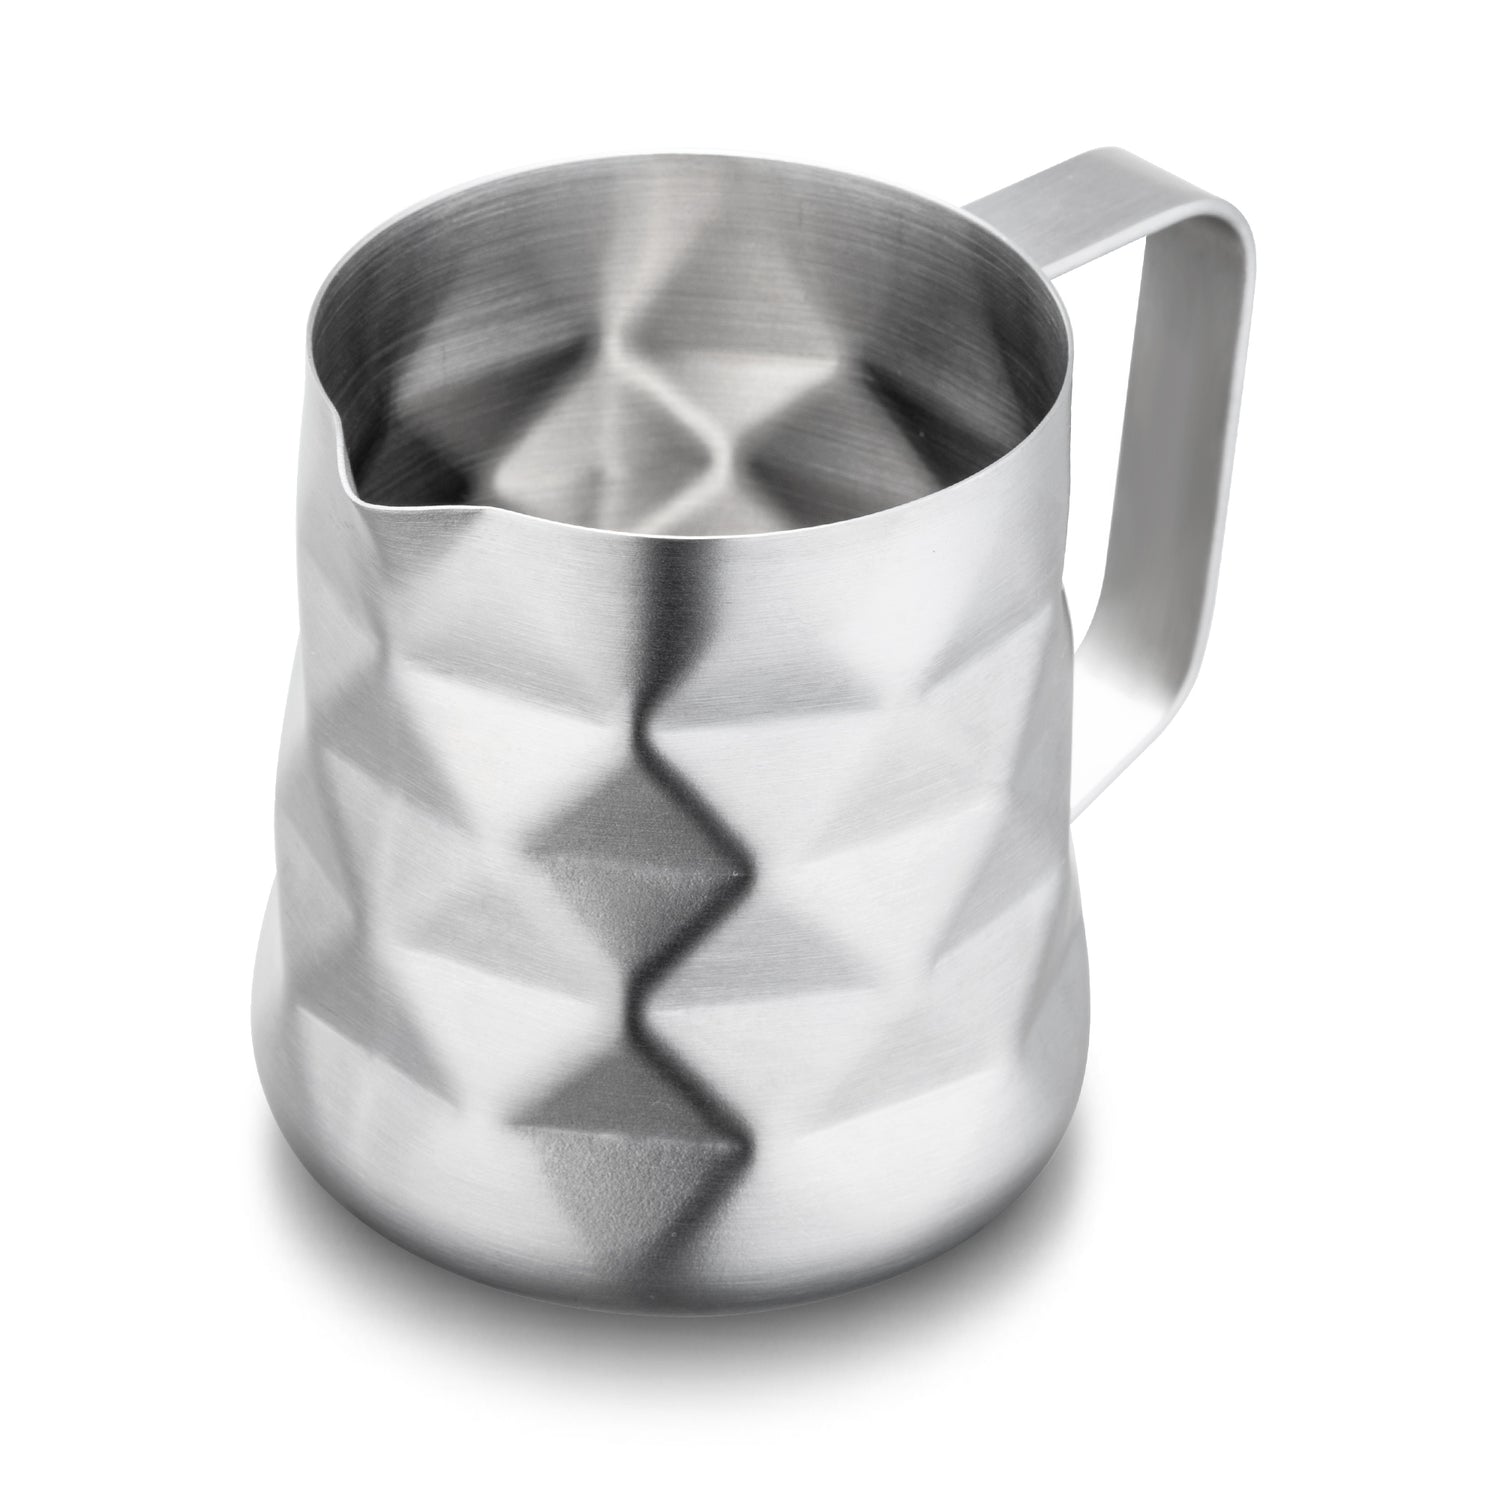 12 Ounce Sleek And Stylish Barista Frothing Pitcher For Making Cappuccinos And Coffee Lattes Prismatic Pattern Stainless Steel